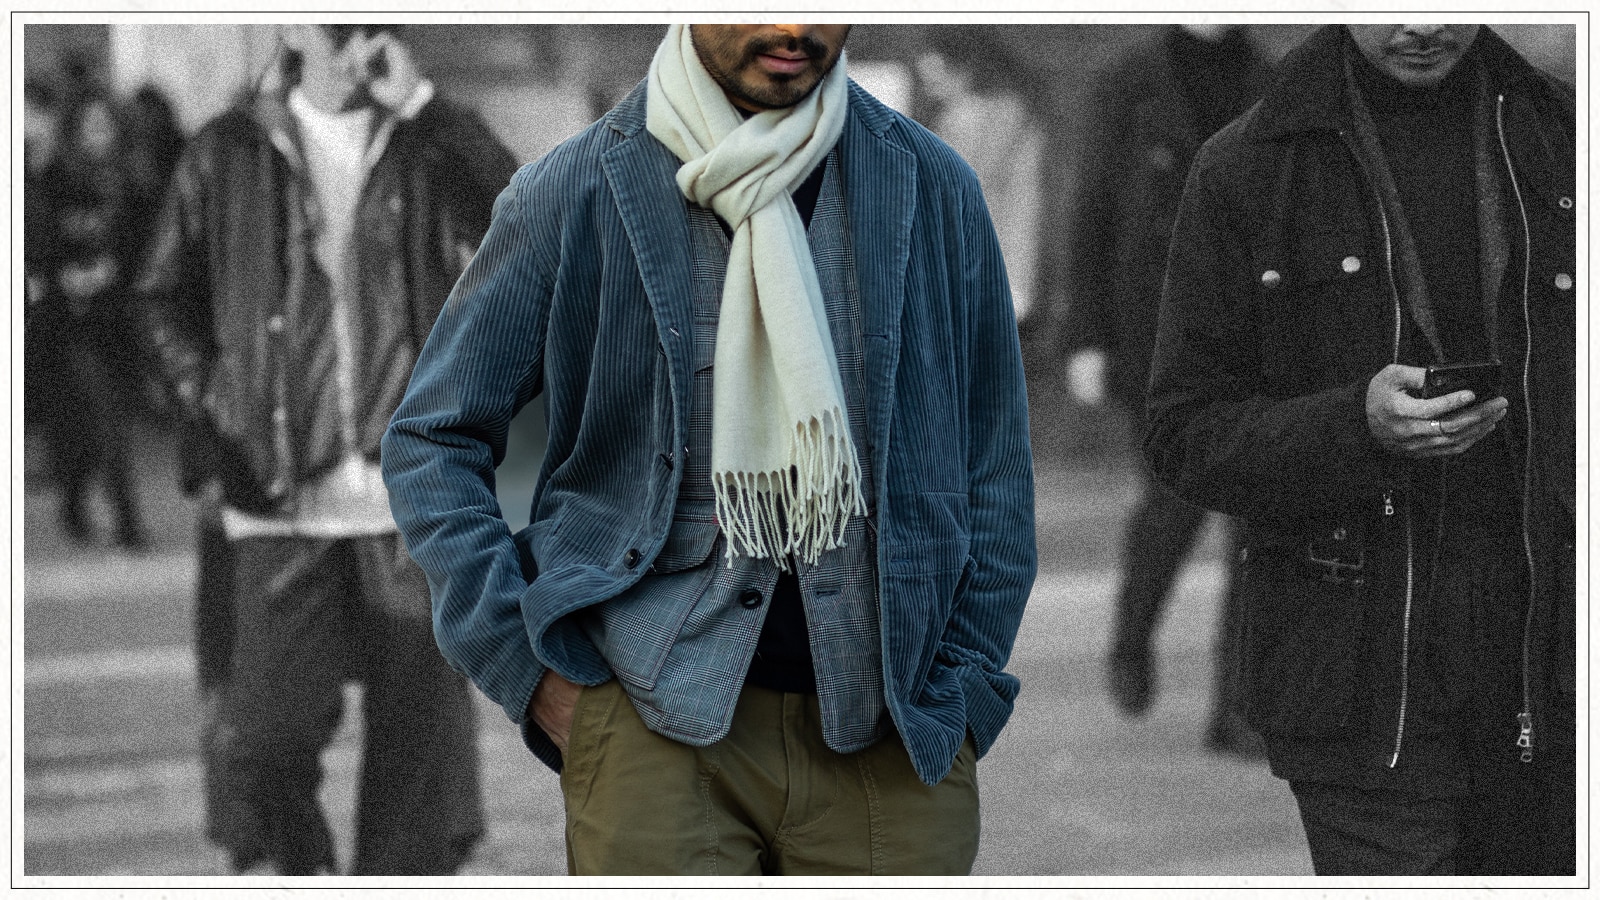 The Five Definitive Ways To Tie A Scarf, The Journal